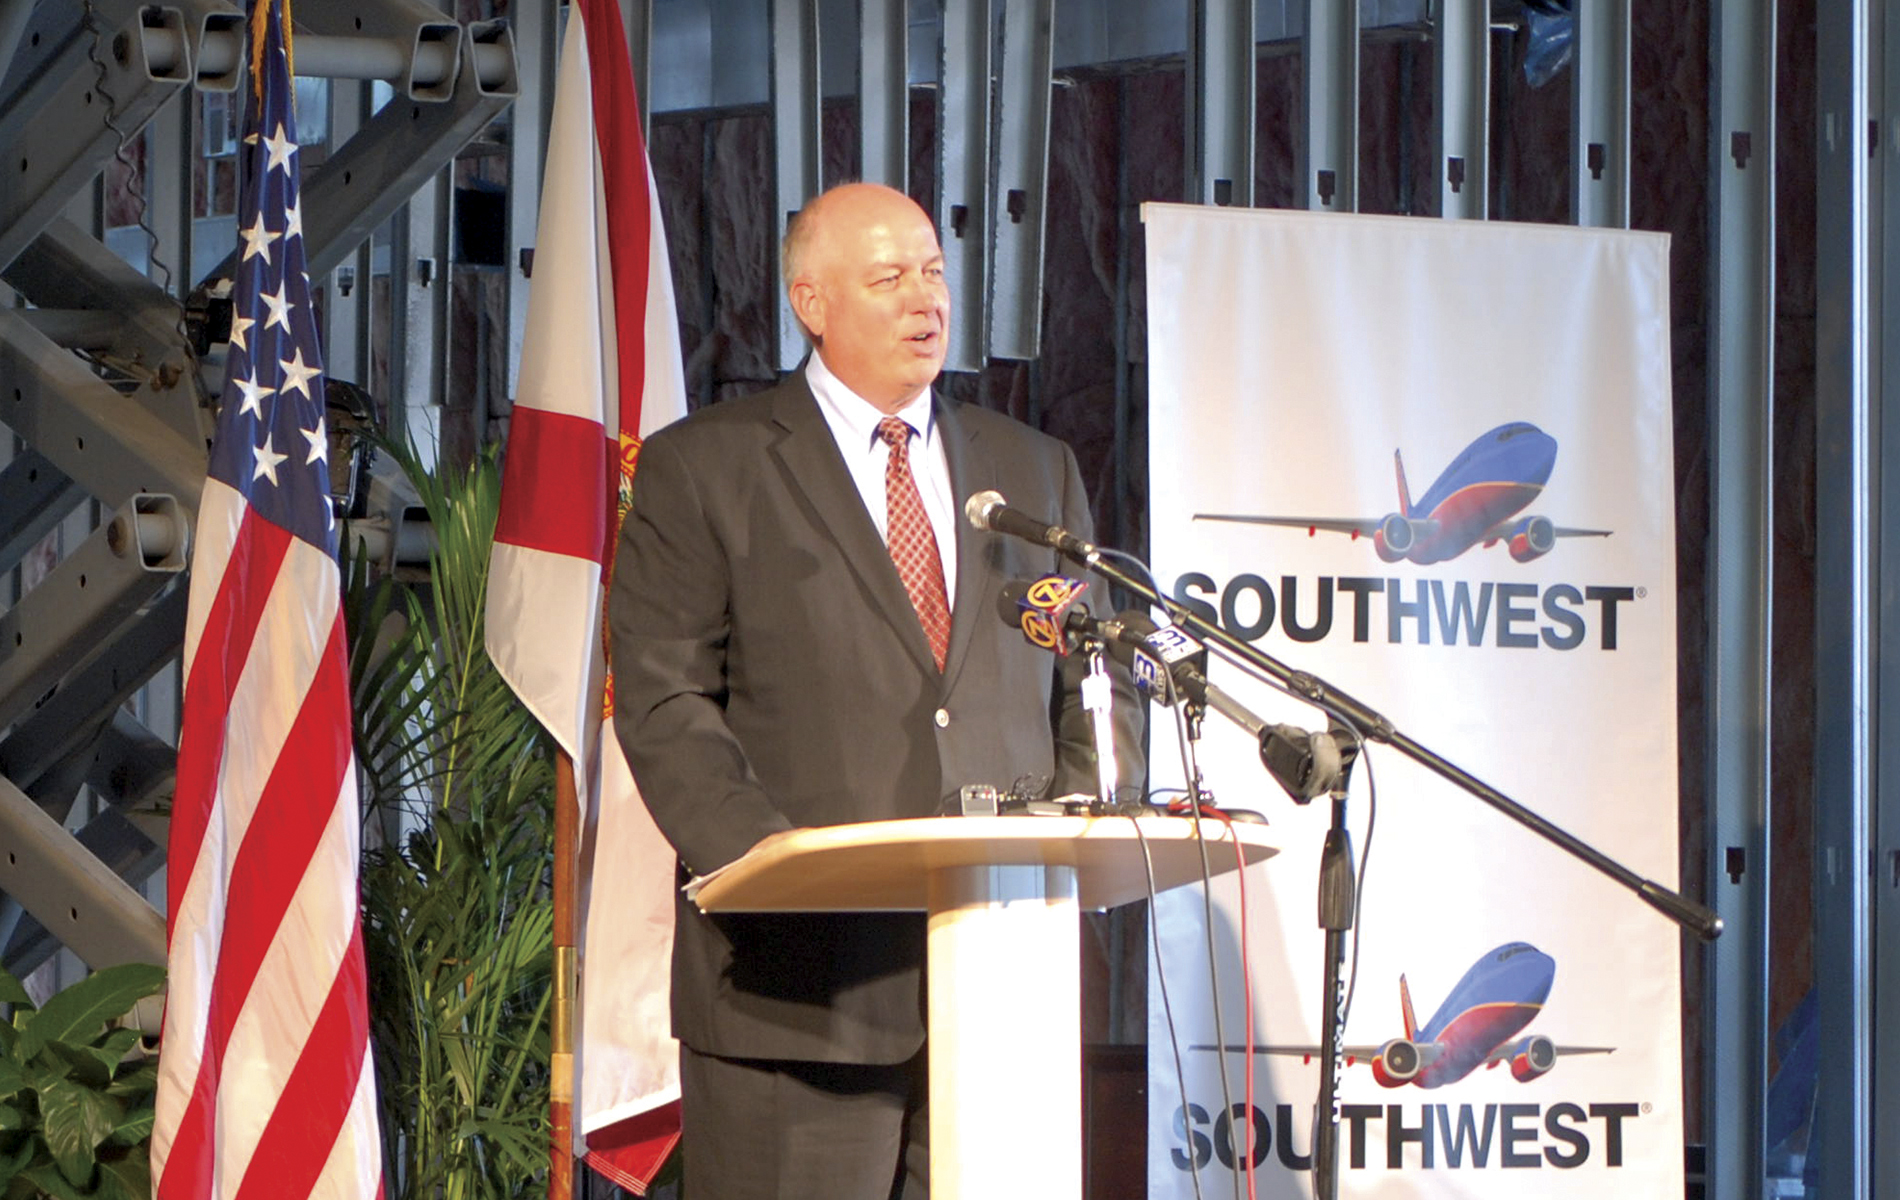 Panama City Welcomes Southwest Airlines